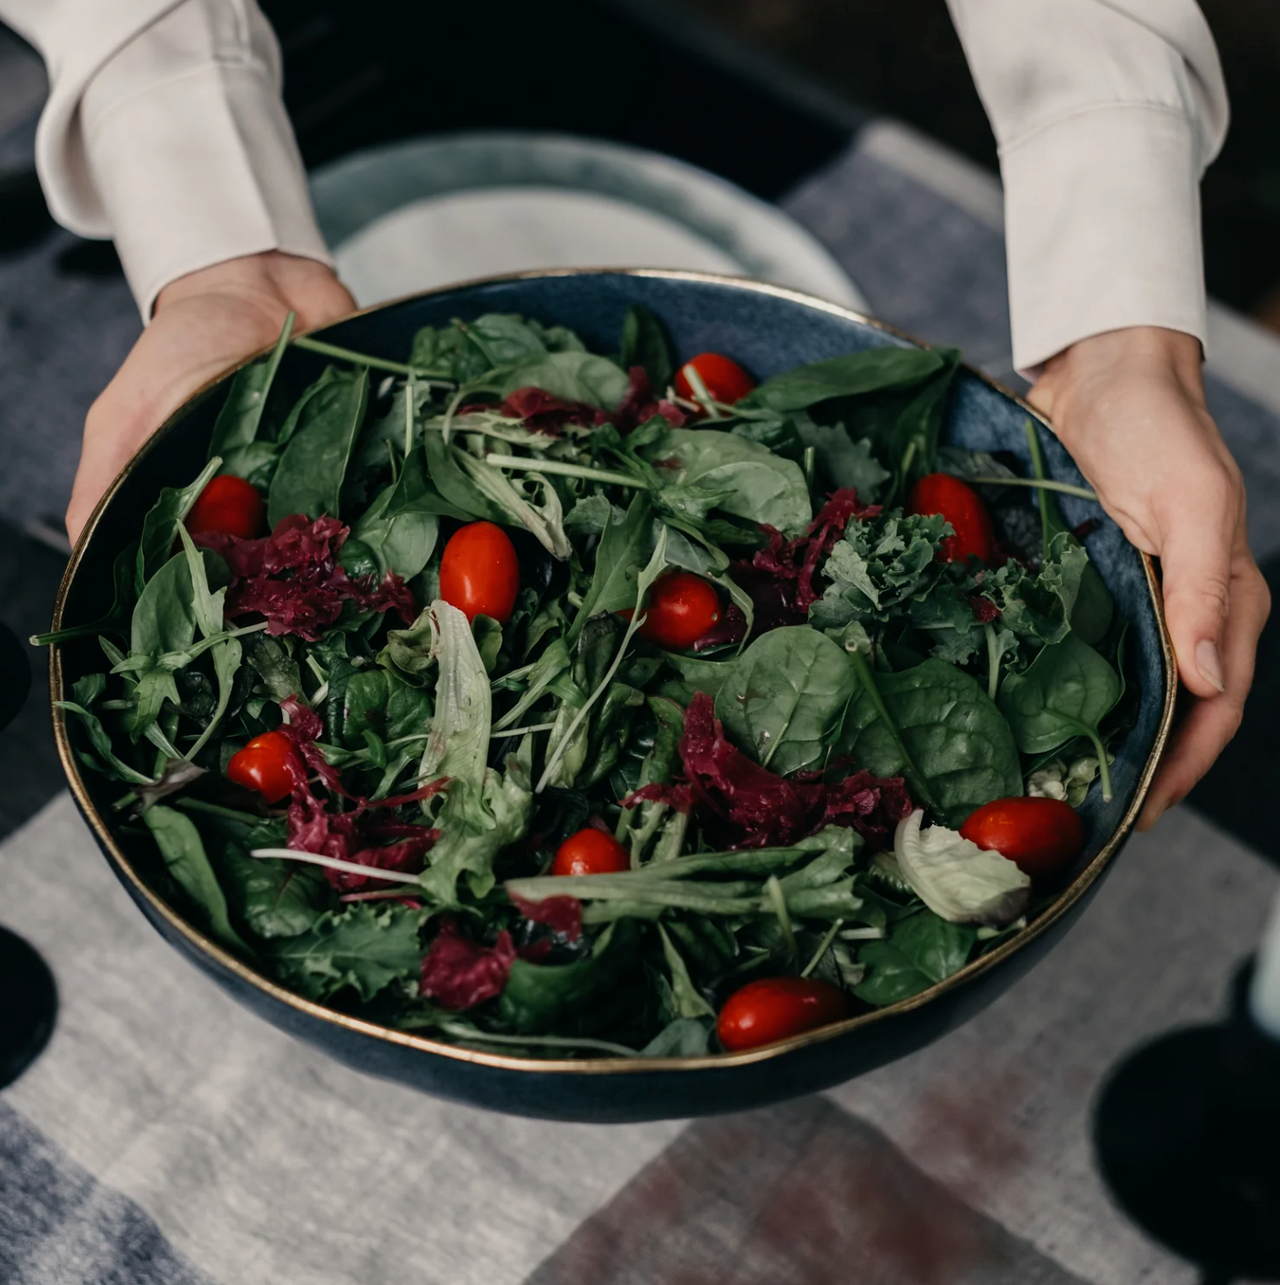 A person holding an Indigo Love Ariel Salad Bowl - Matt Black filled with greens and tomatoes.